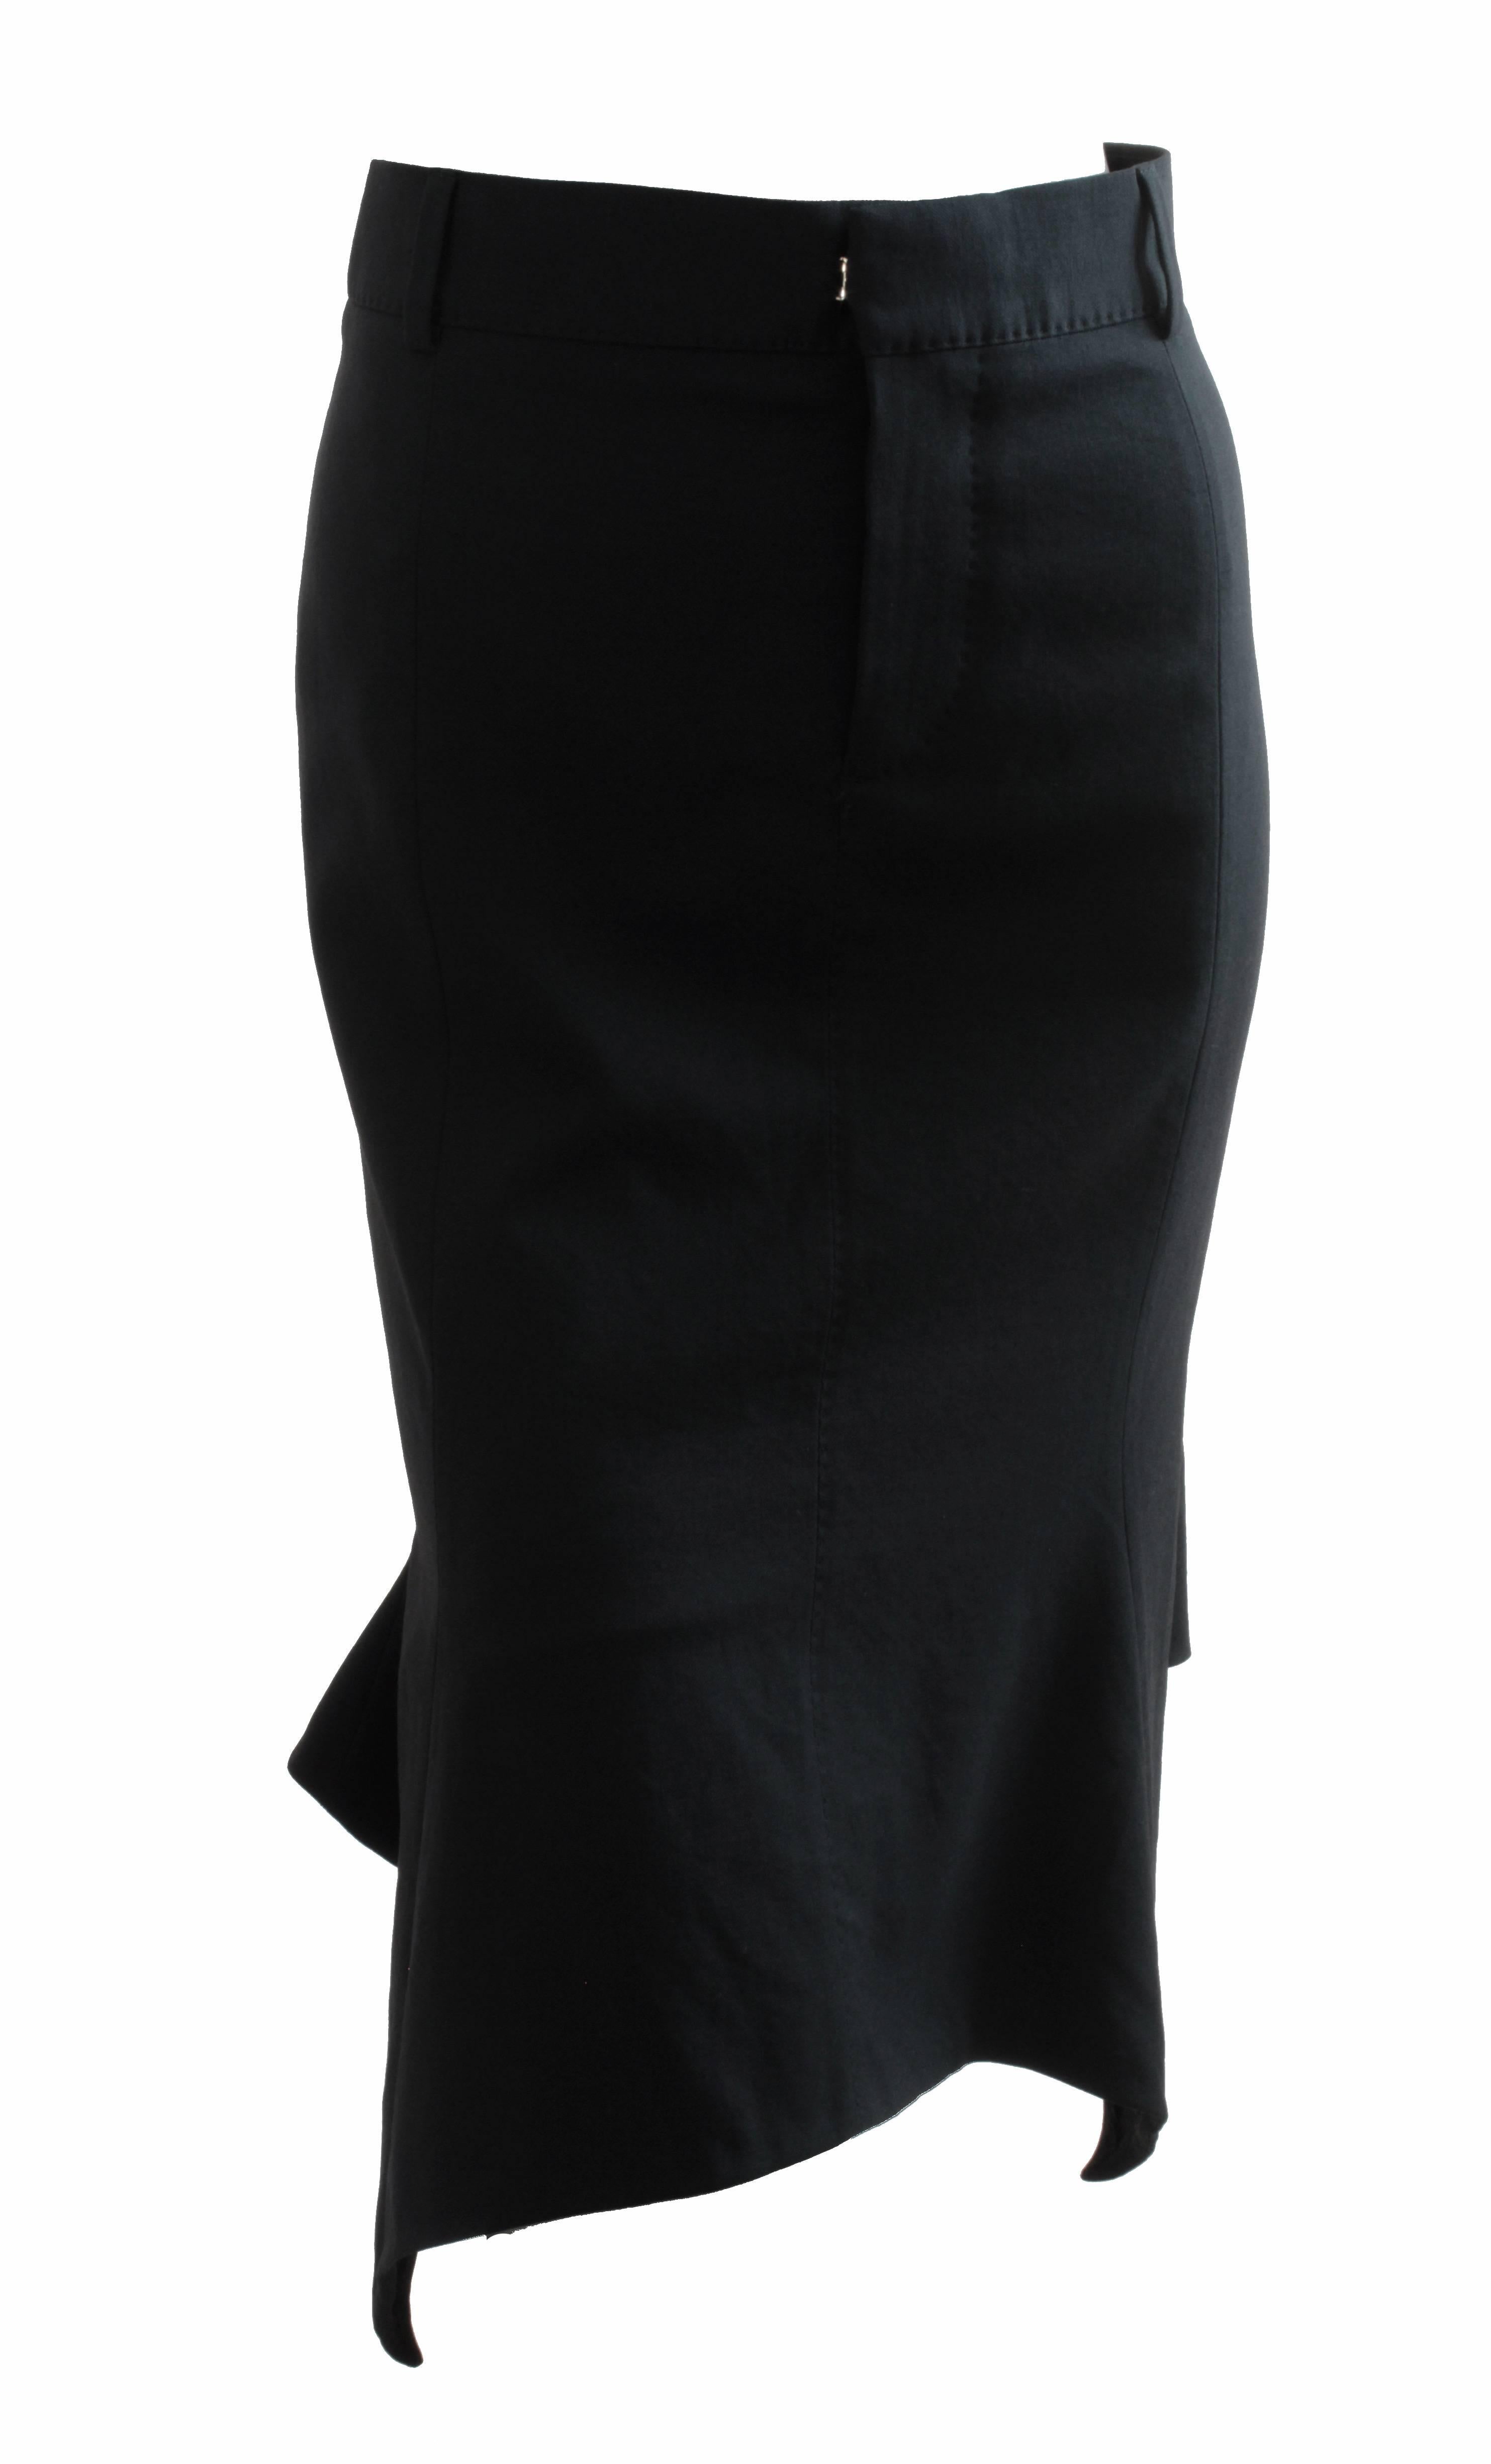 This fabulous dropped hem skirt was made by Tom Ford and retailed for $1295. Made from a light weight wool, it's fully-lined in black silk and fastens in front with a button, flat hook & eye closure and zipper.  We love the asymmetric hem that